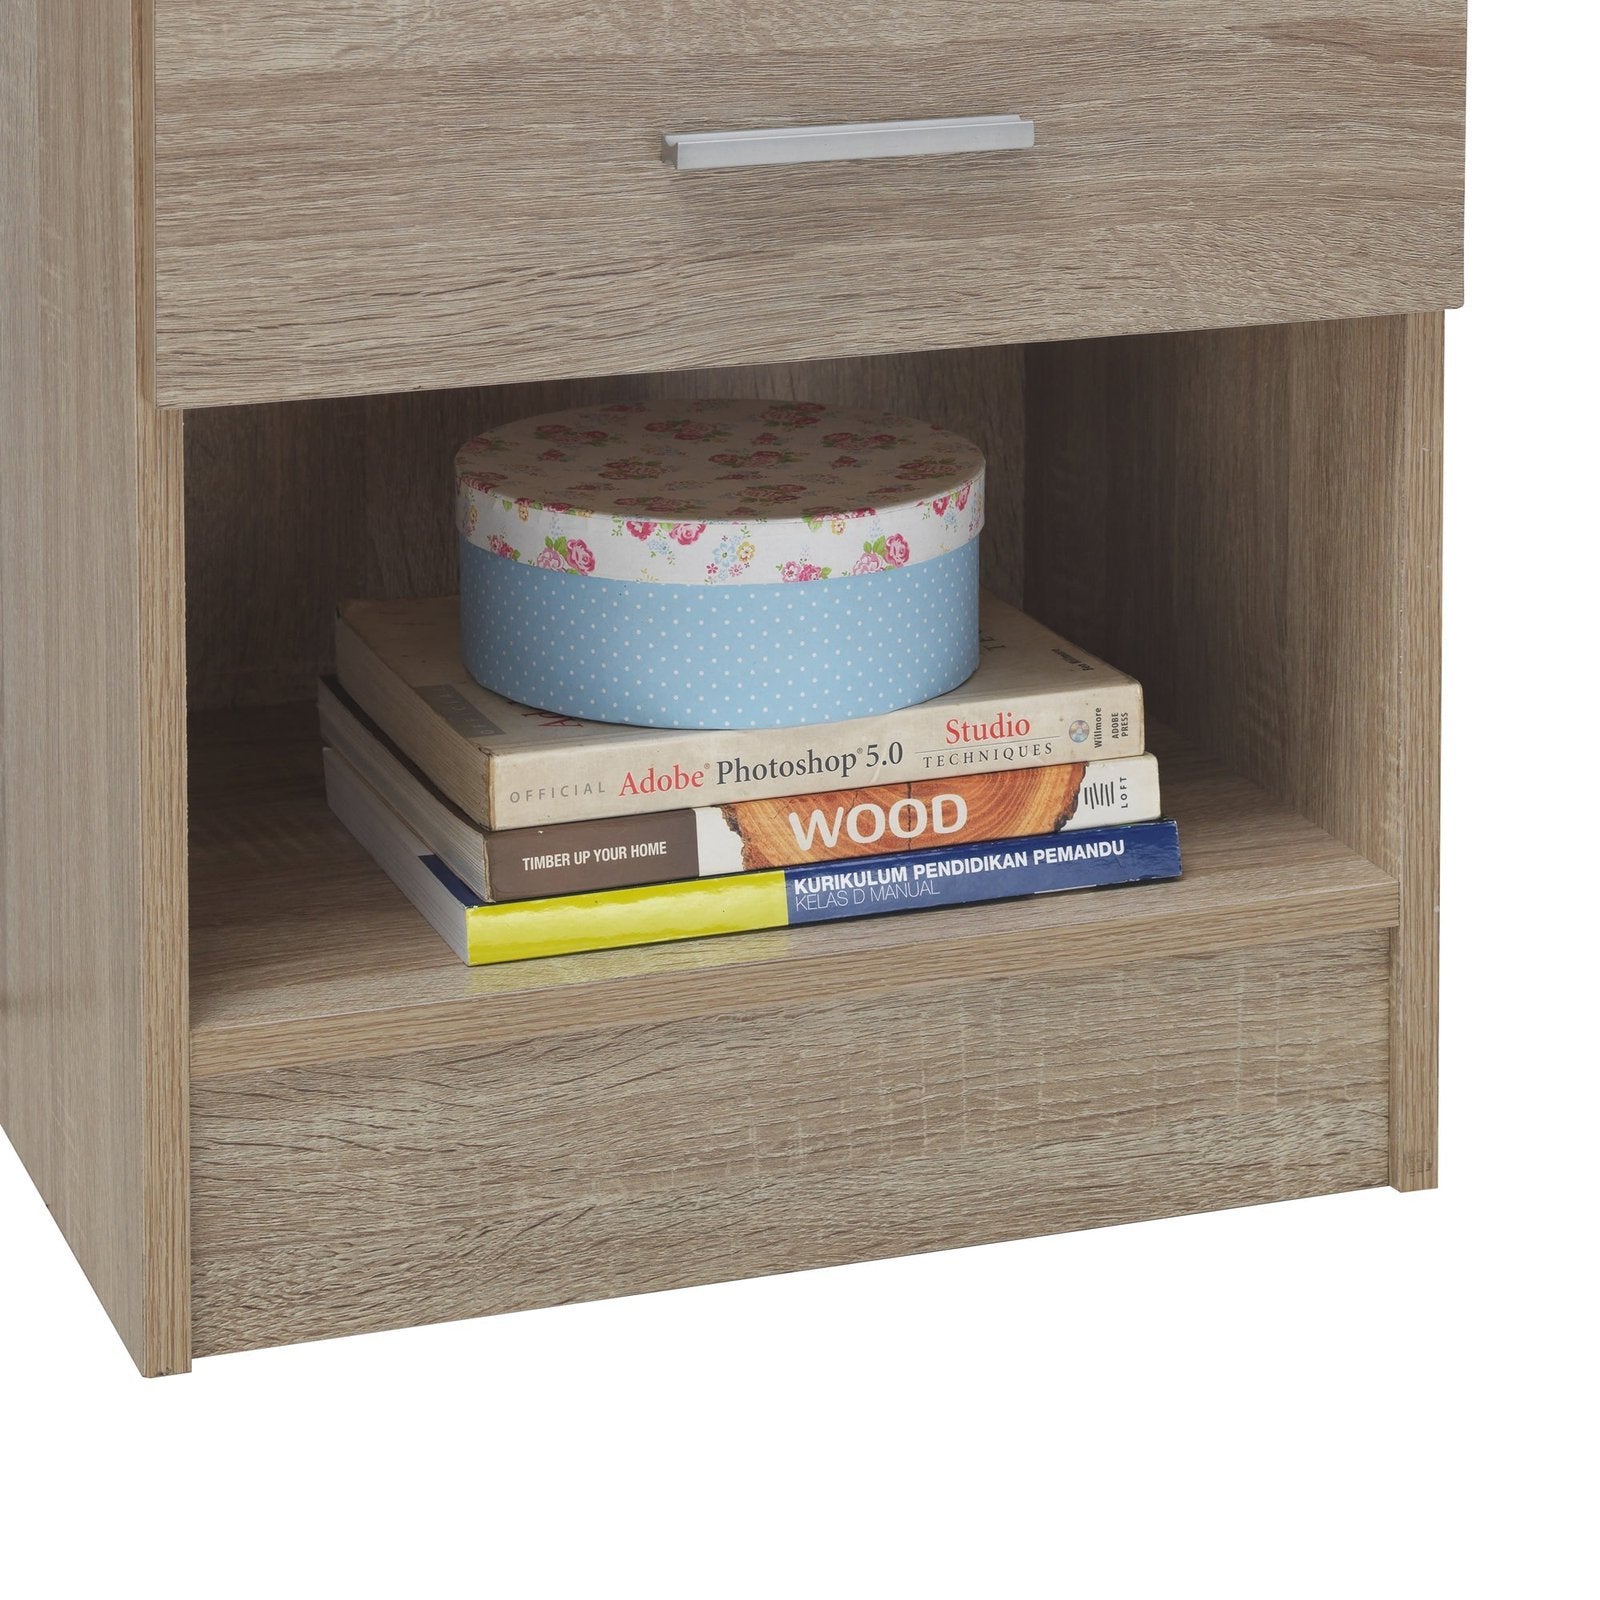 Rio Costa Nightstand with 1 Drawer Traditional Design